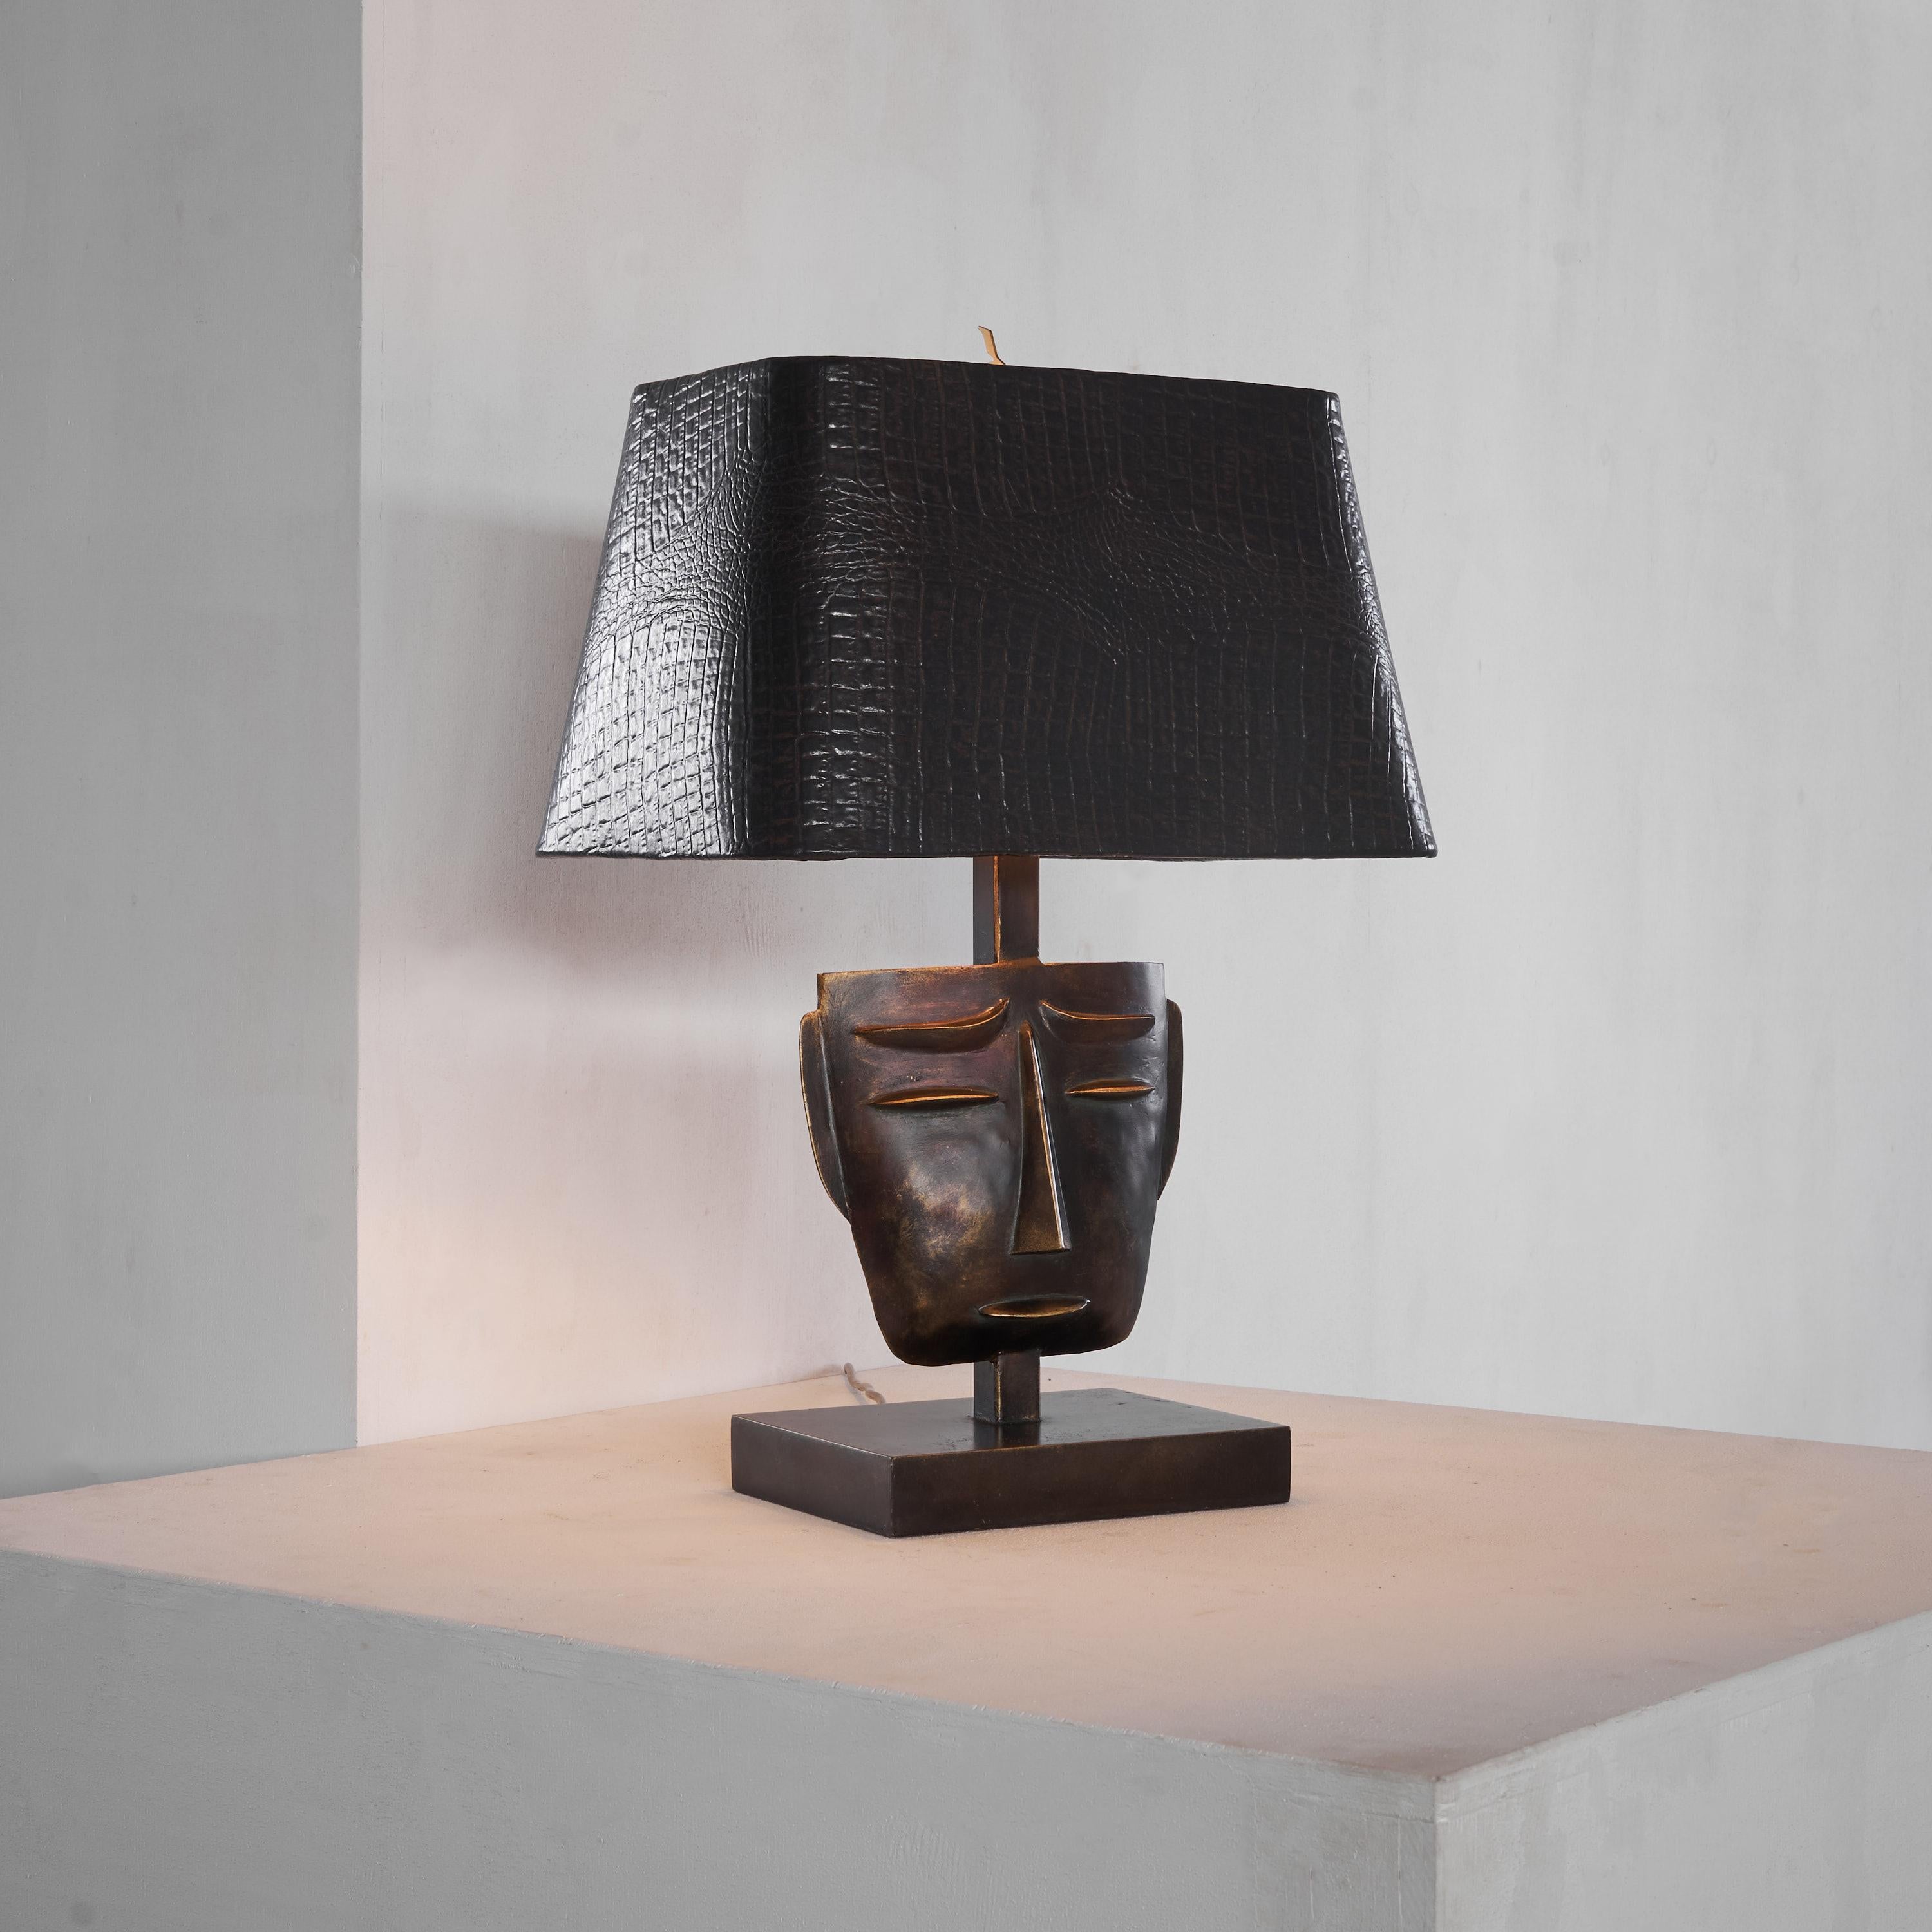 Lam Lee 'Visage' table lamp by Leeazanne. USA, 1990s.

Creative and elegant large table lamp by Lam Lee for Leeazanne, the lighting division of the Lam Lee Group. A joyful design, which has very nice details and quality. The face at the front